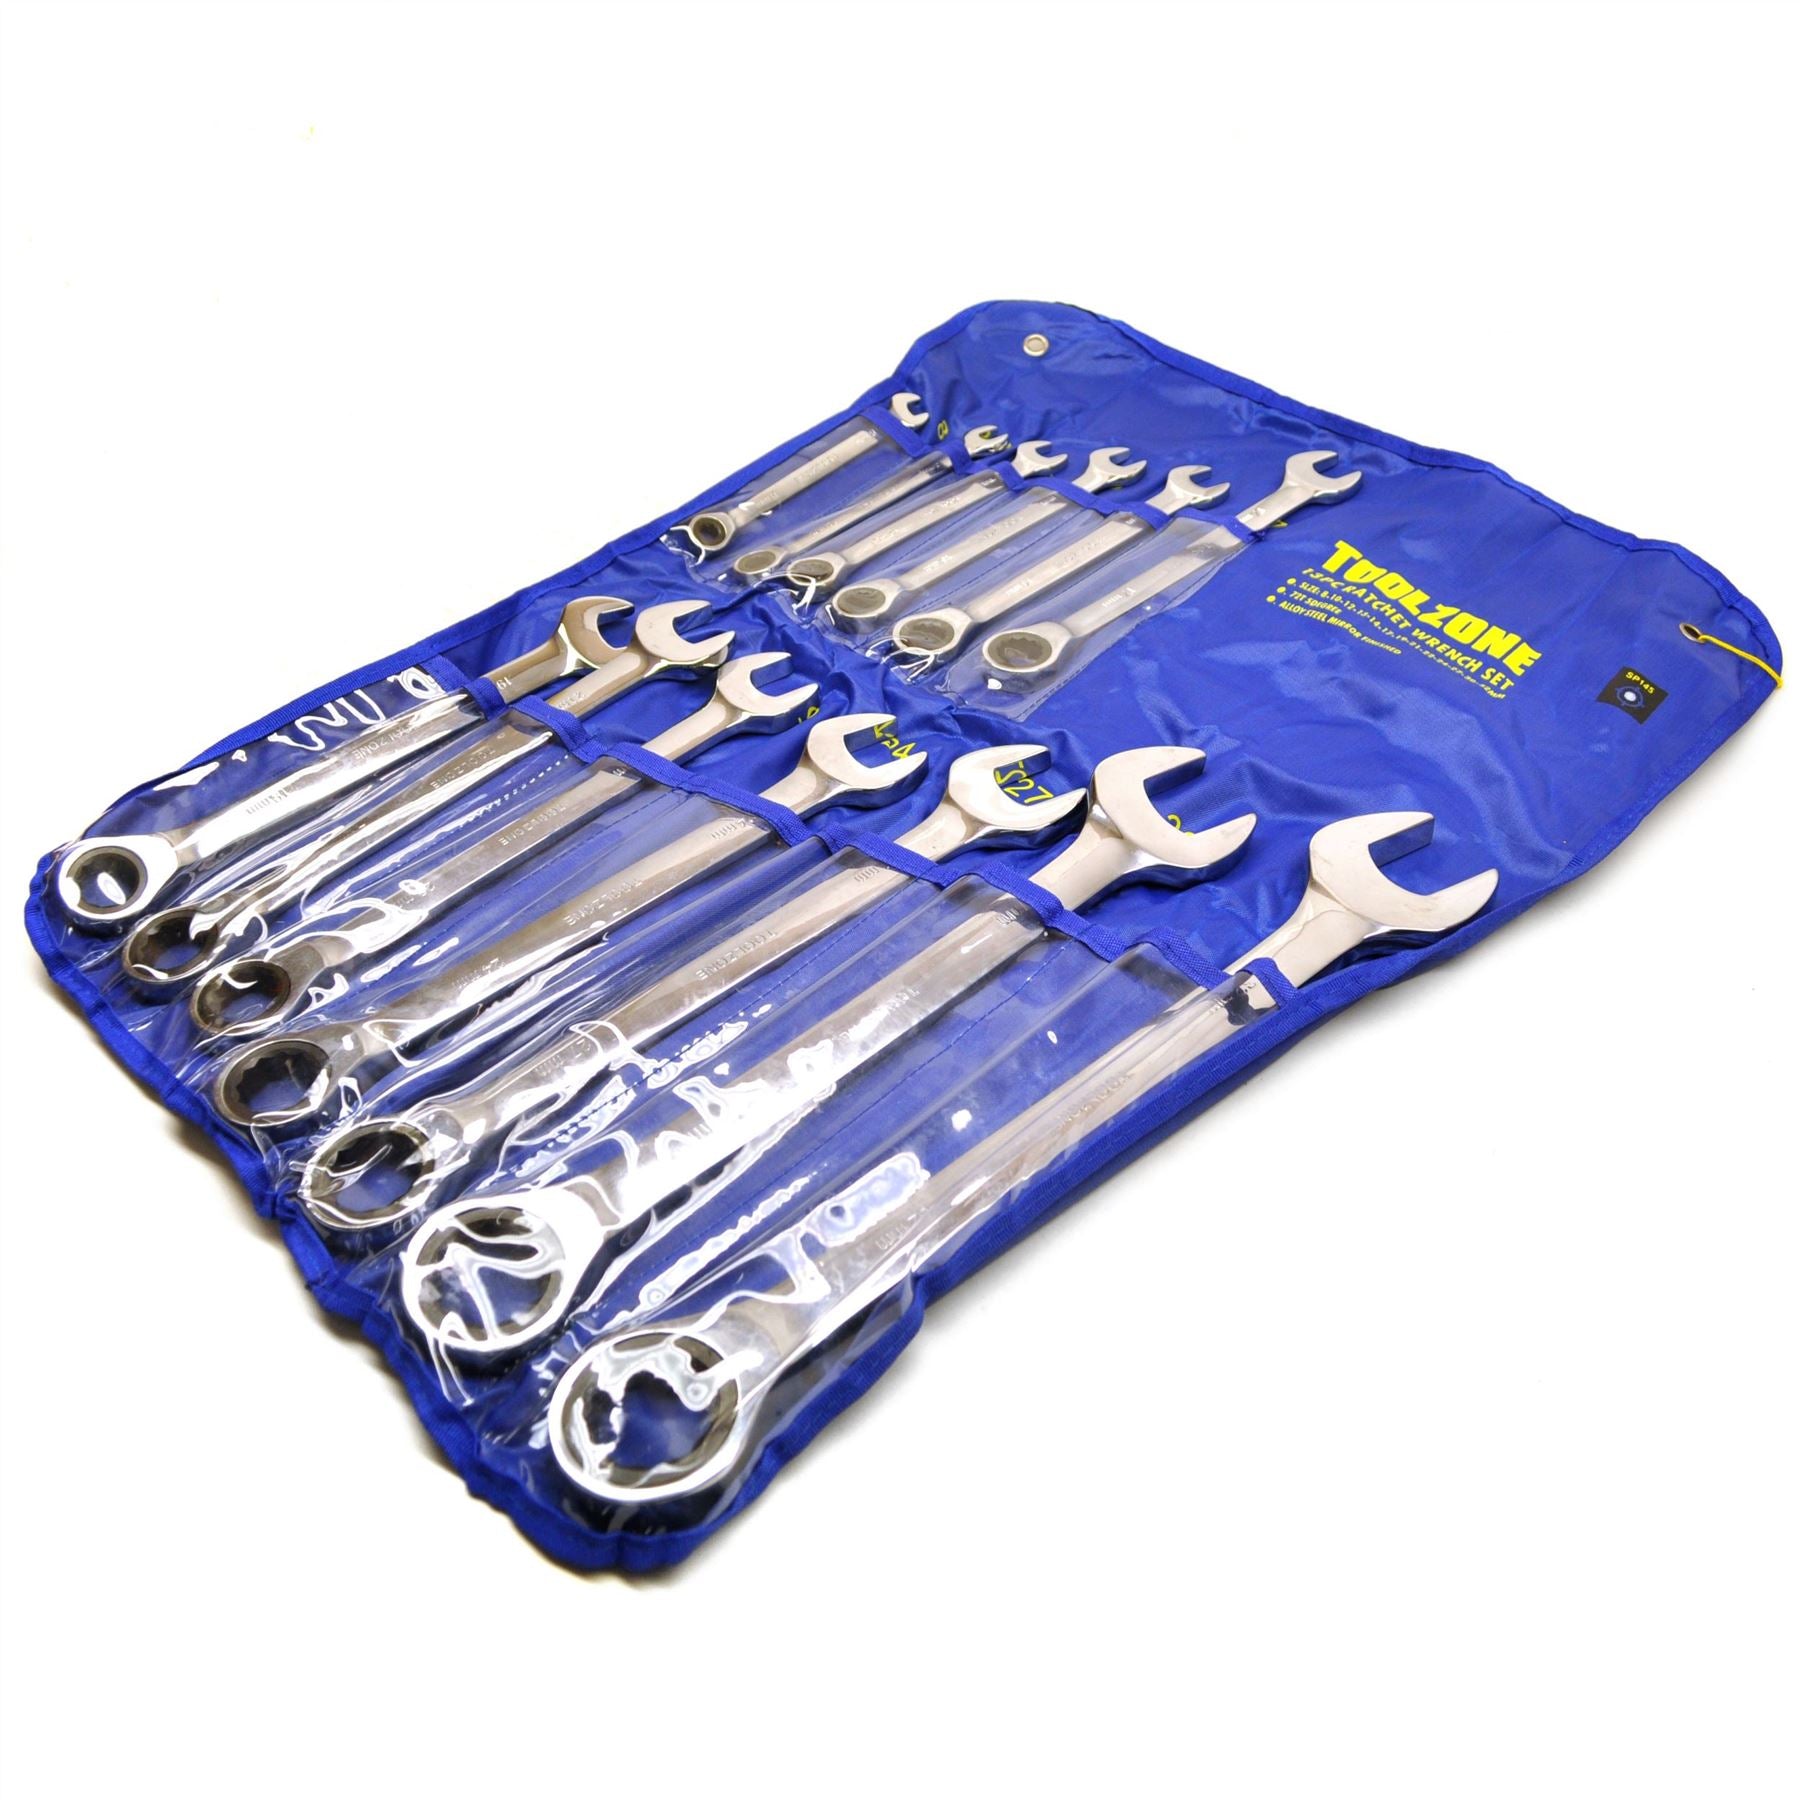 13pc Ratchet Combination Open Ended Ring Spanner Wrench Metric 8mm - 32mm TE217